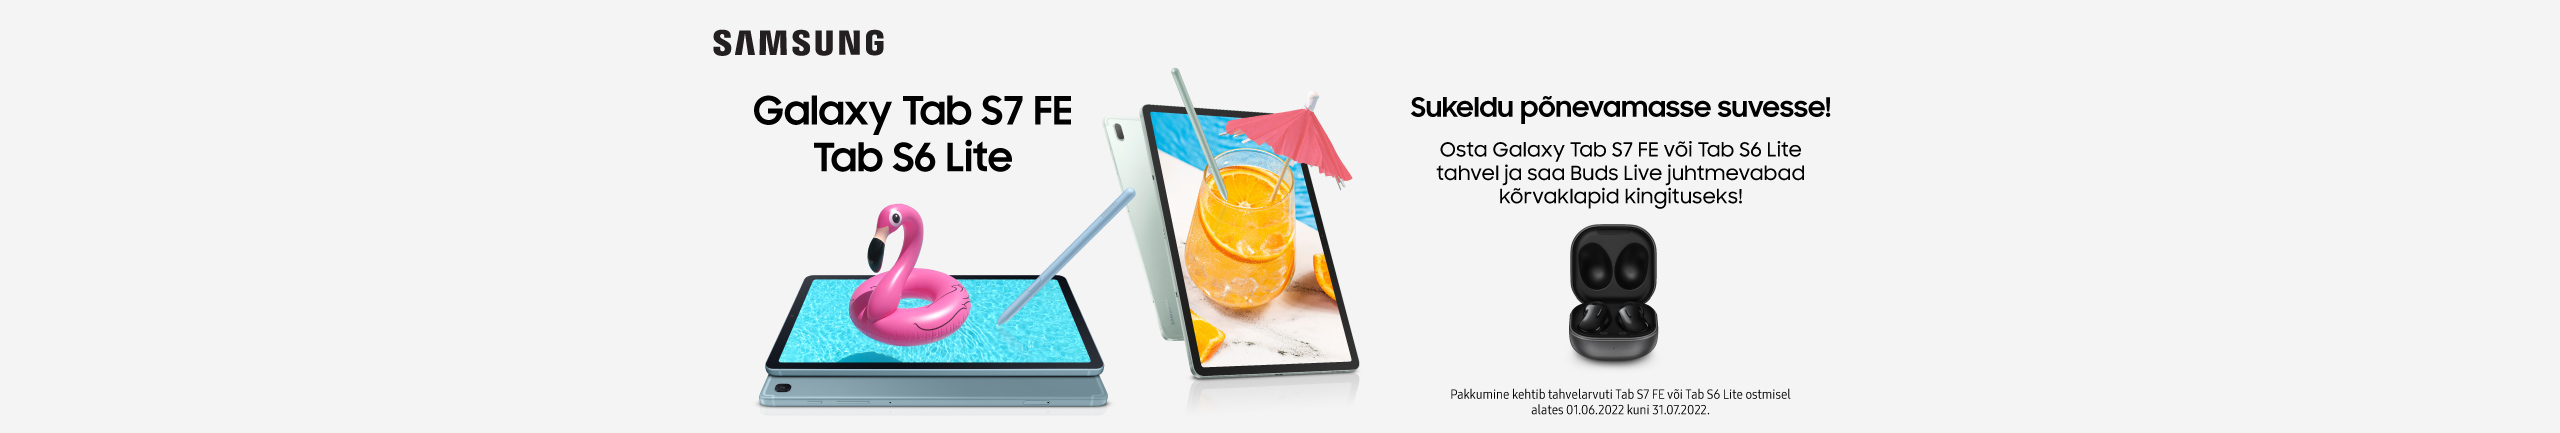 Buy Samsung Galaxy Tab S6 Lite or Tab S7 FE and get Galaxy Buds Live headphones as a complimentary gift!